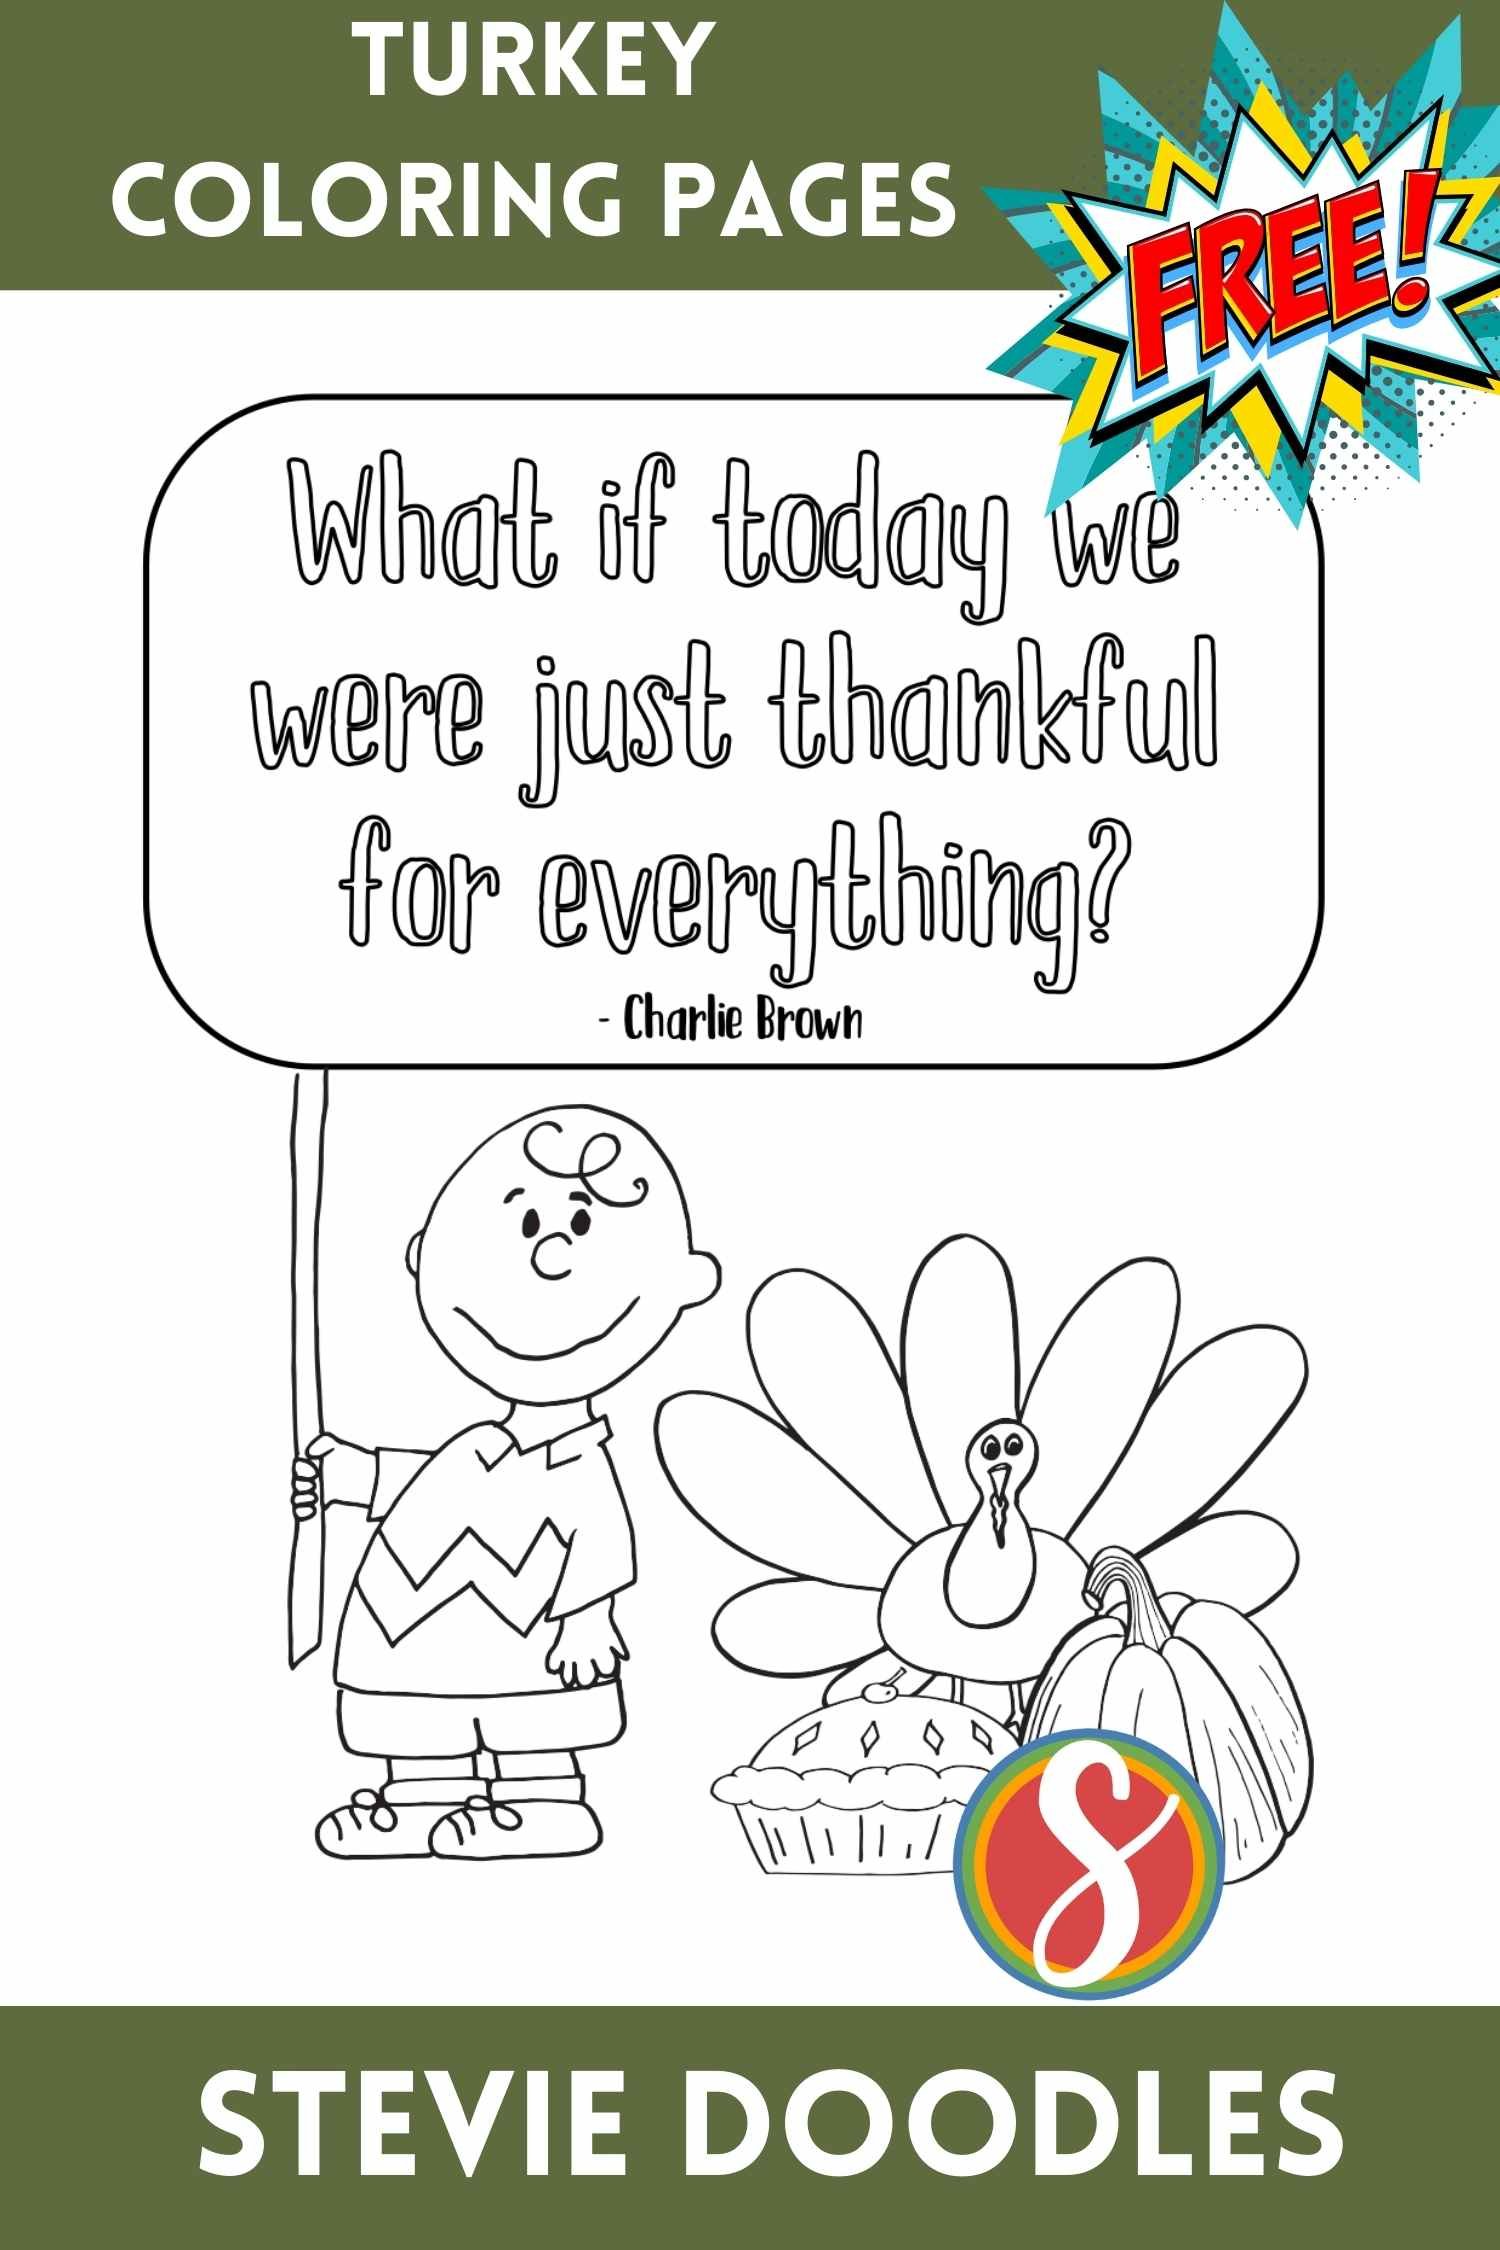 charlie brown holding a sign "What if today we were just thankful for everything?"  a pumpkin, pie, and turkey to color